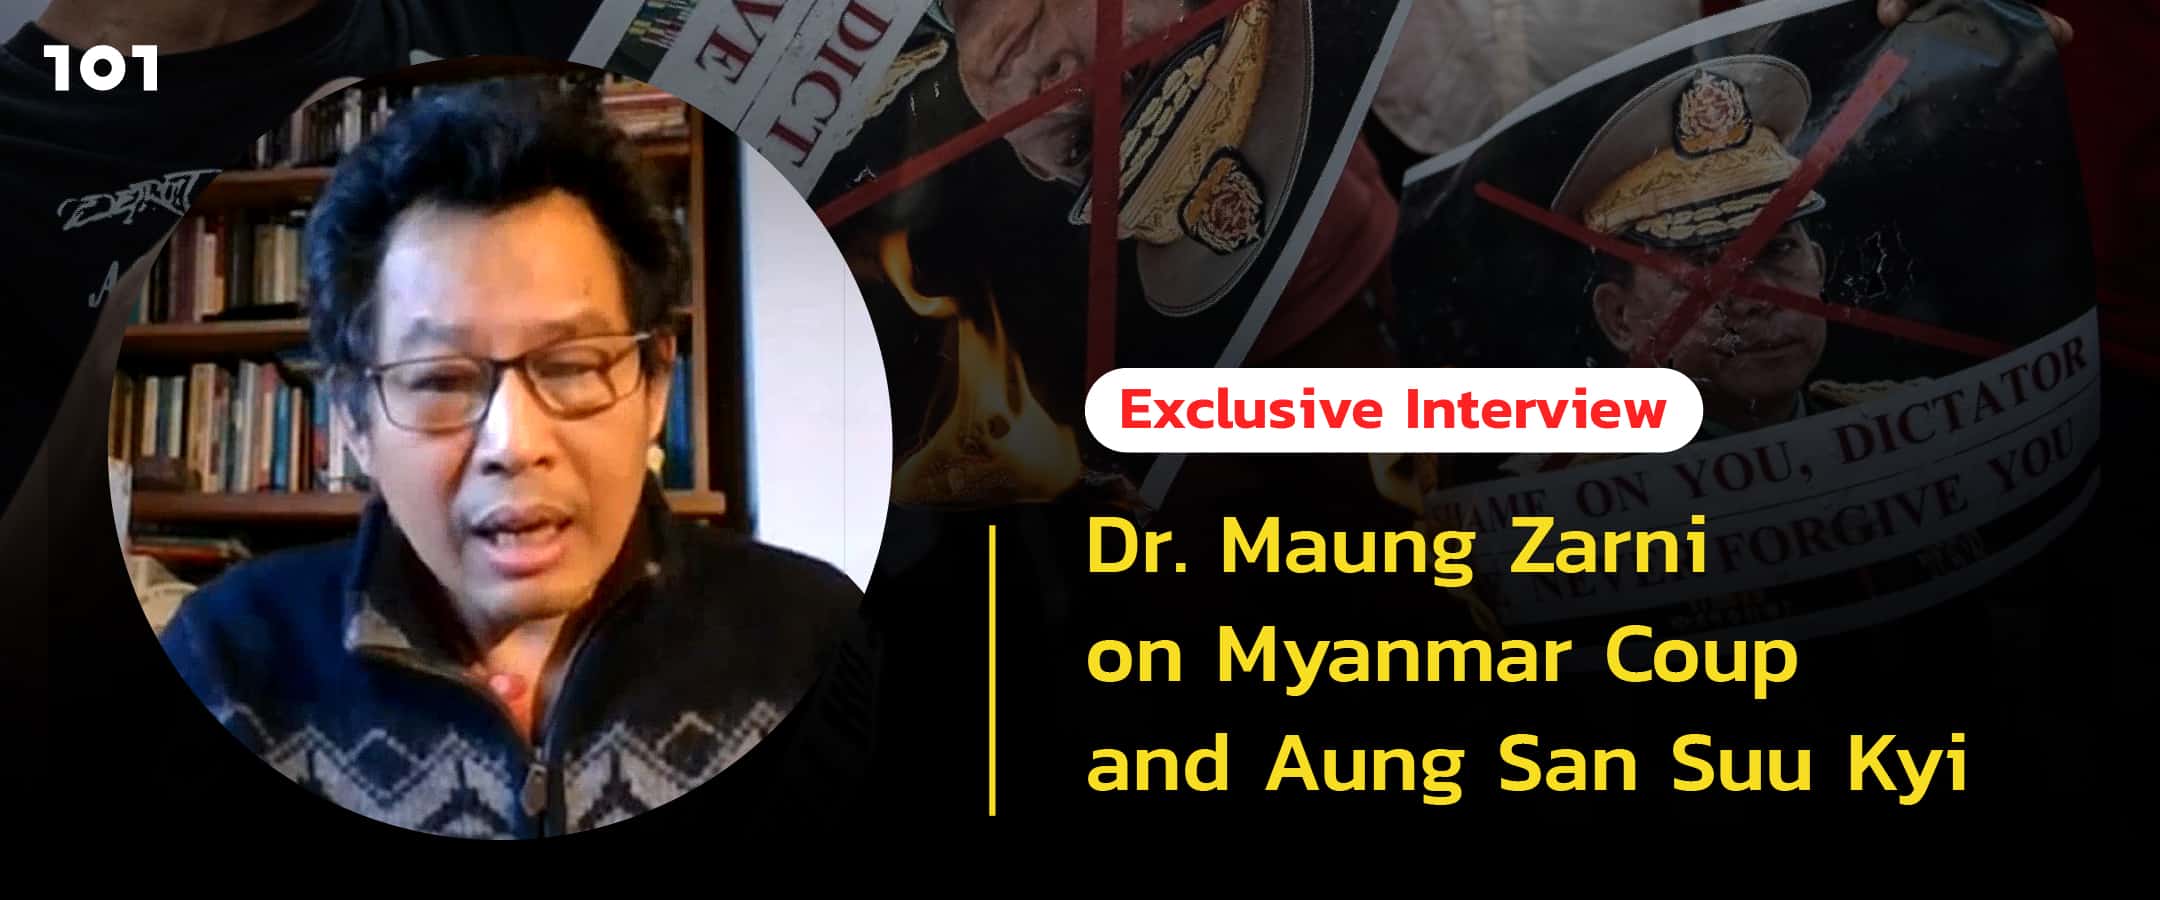 Exclusive Interview : Dr. Maung Zarni on Myanmar Coup and Aung San Suu Kyi